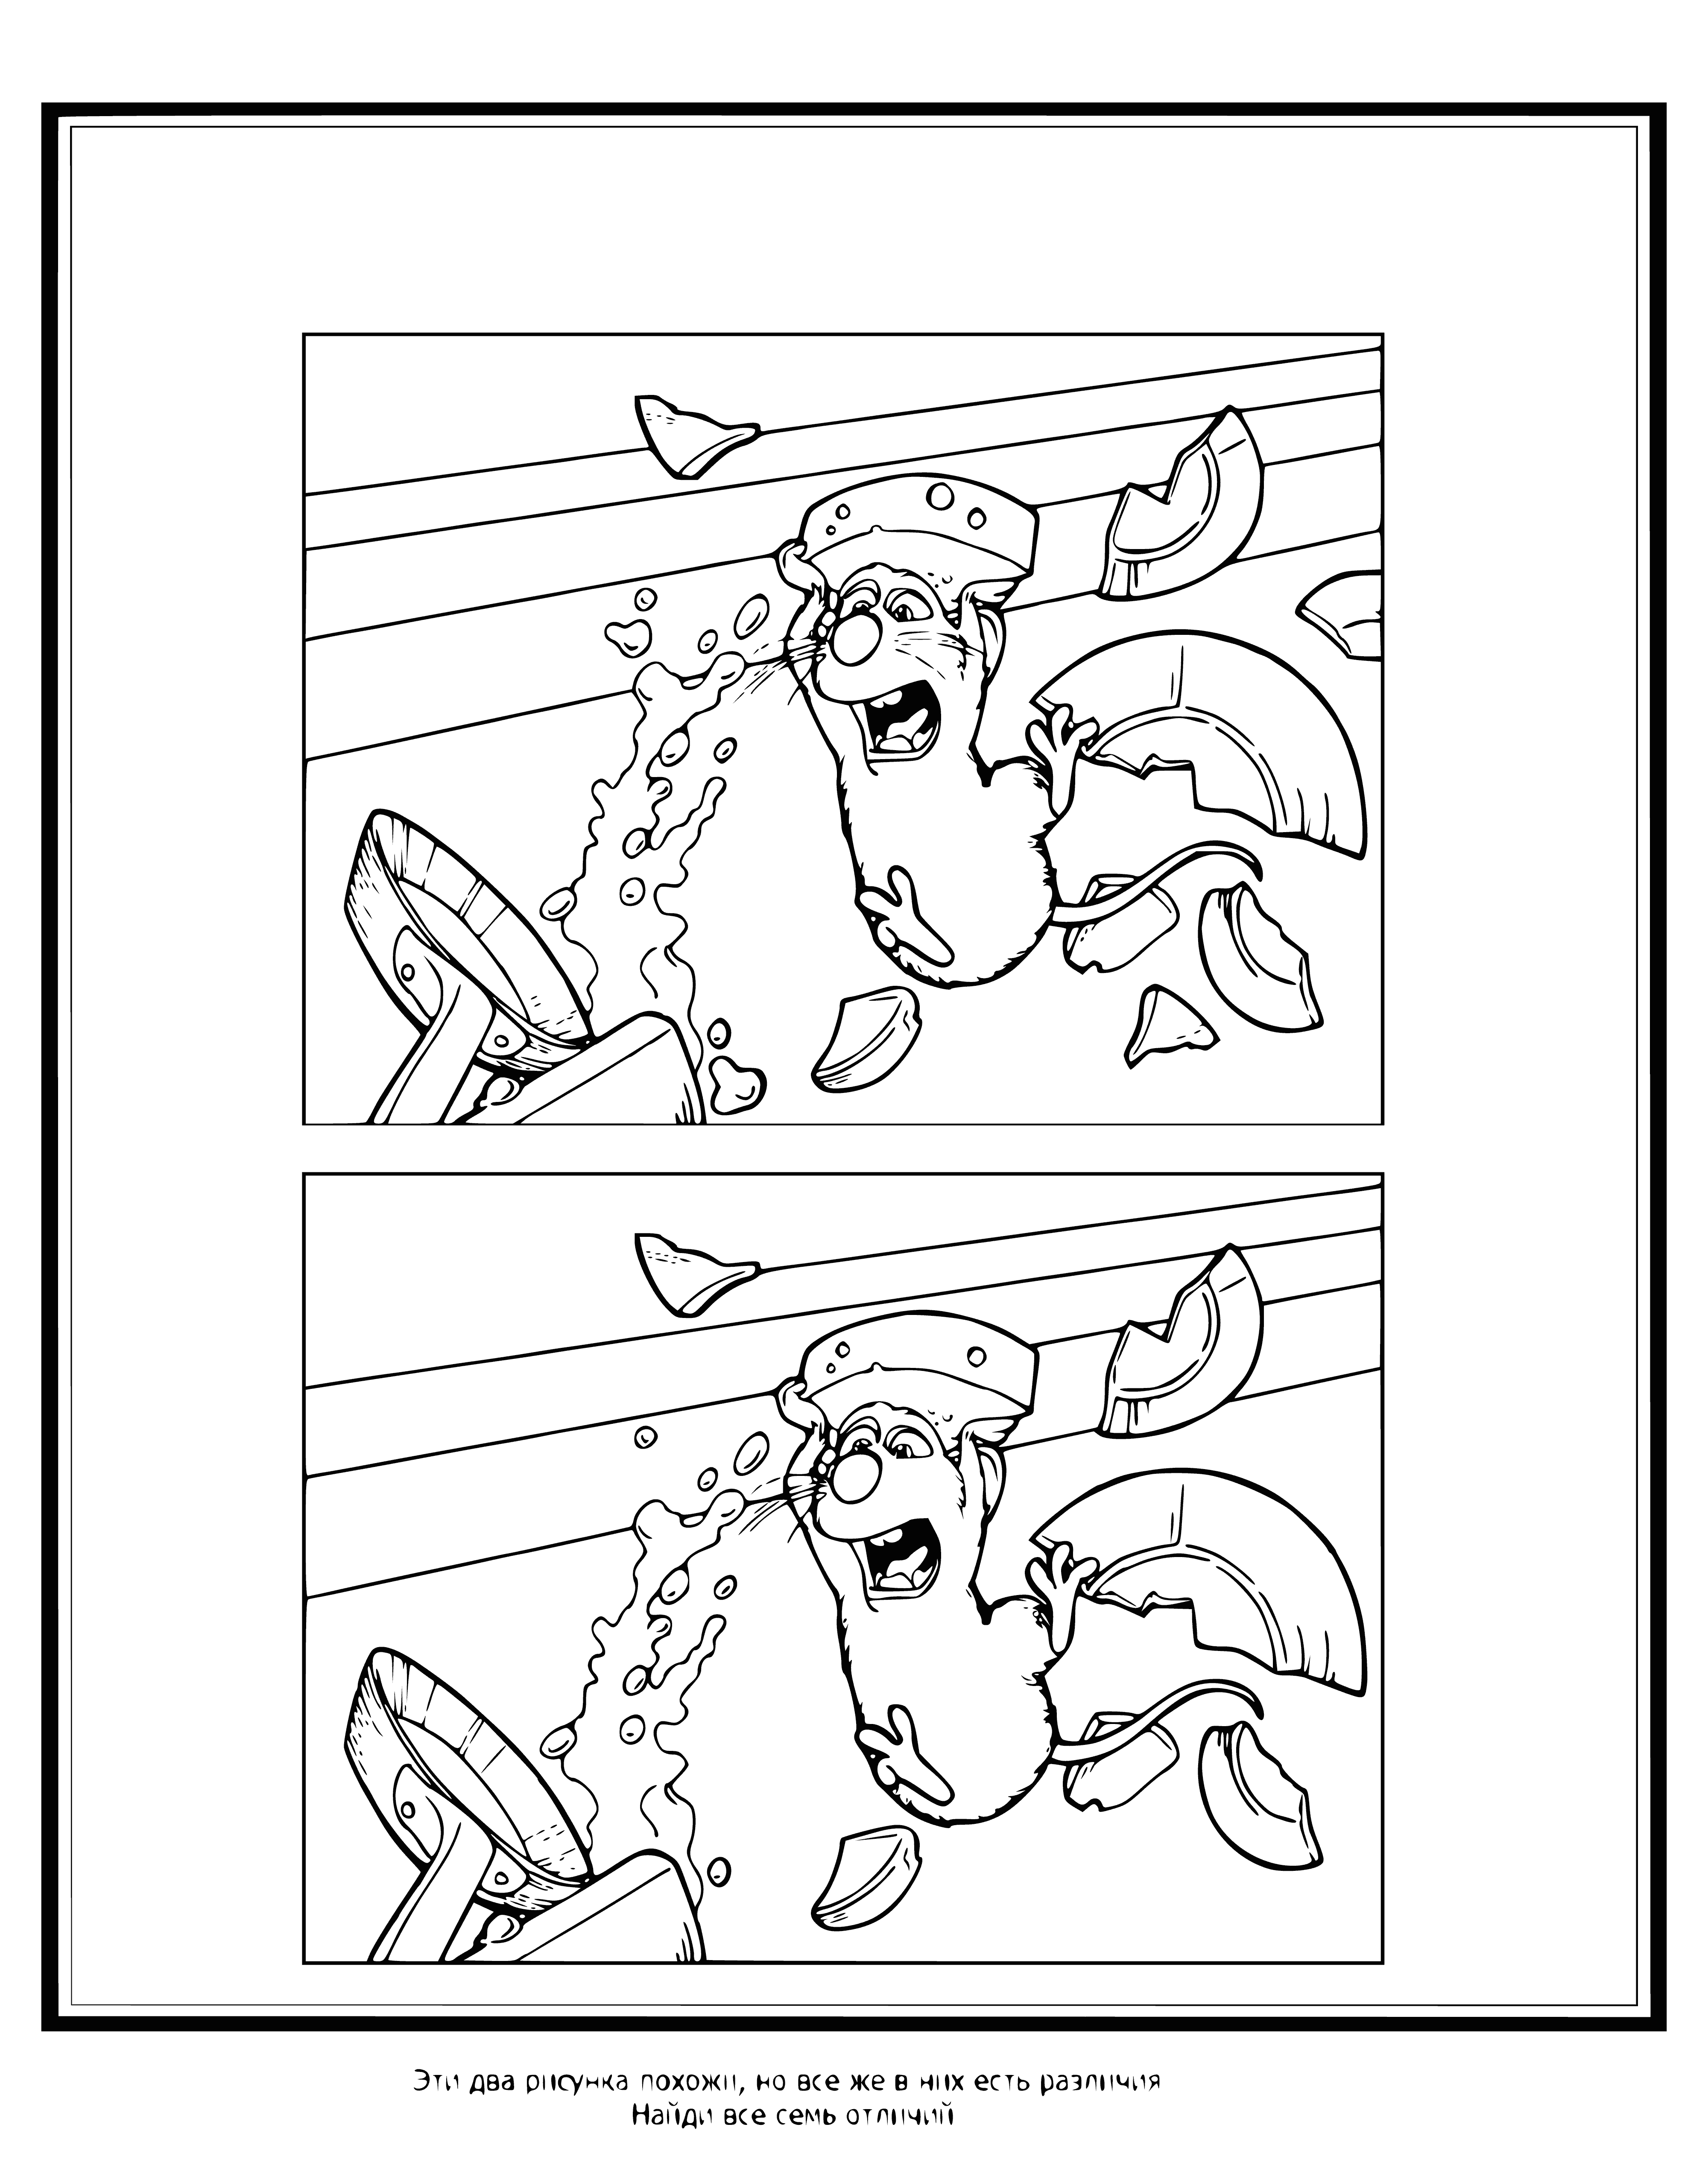 Find differences coloring page